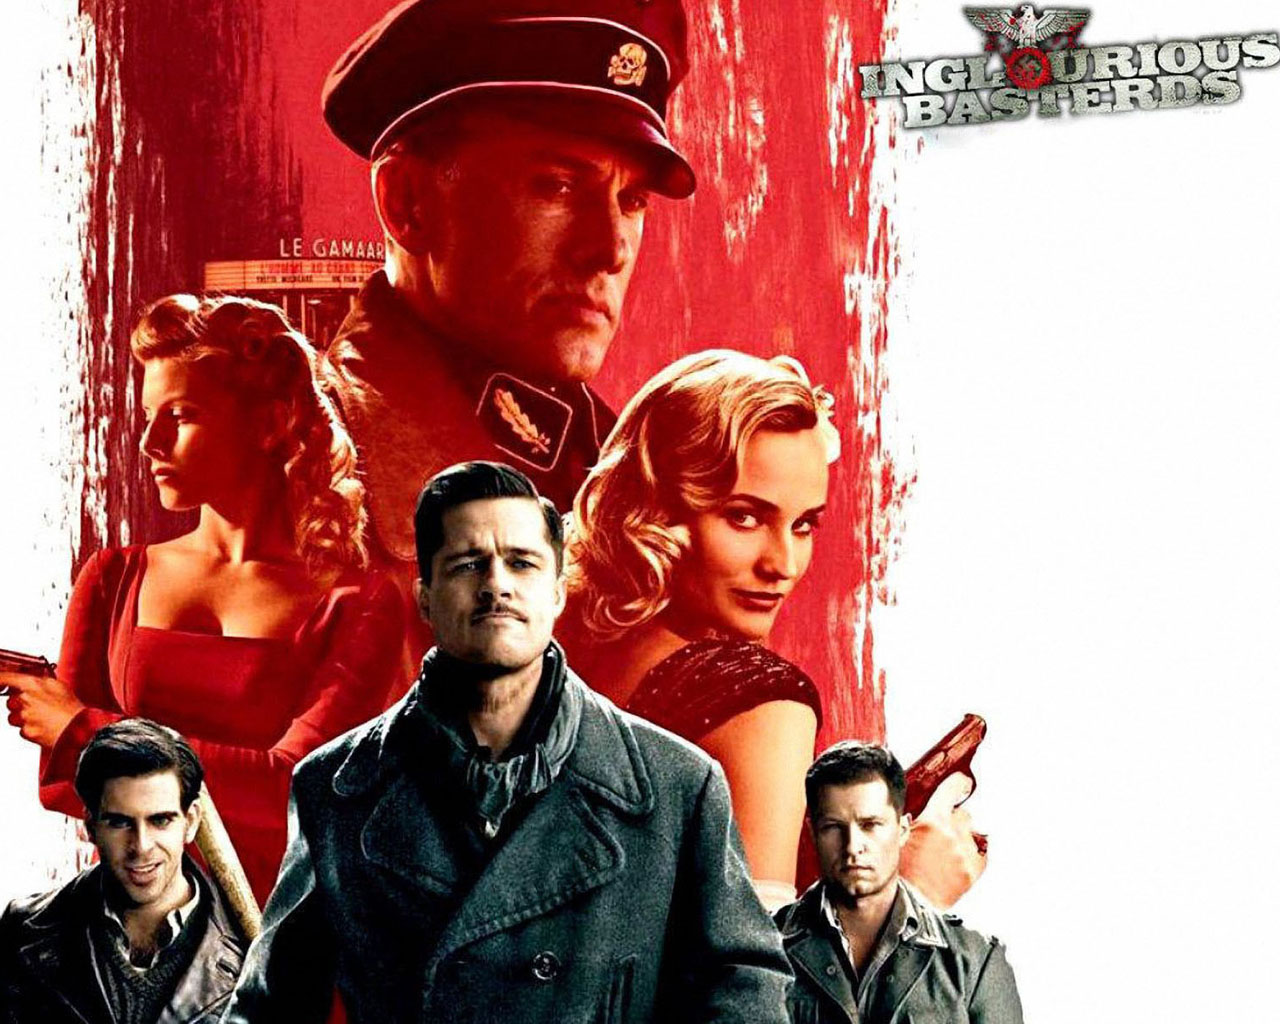 Inglourious Basterds9 1280x1024 Wallpapers, 1280x1024 Wallpapers ...